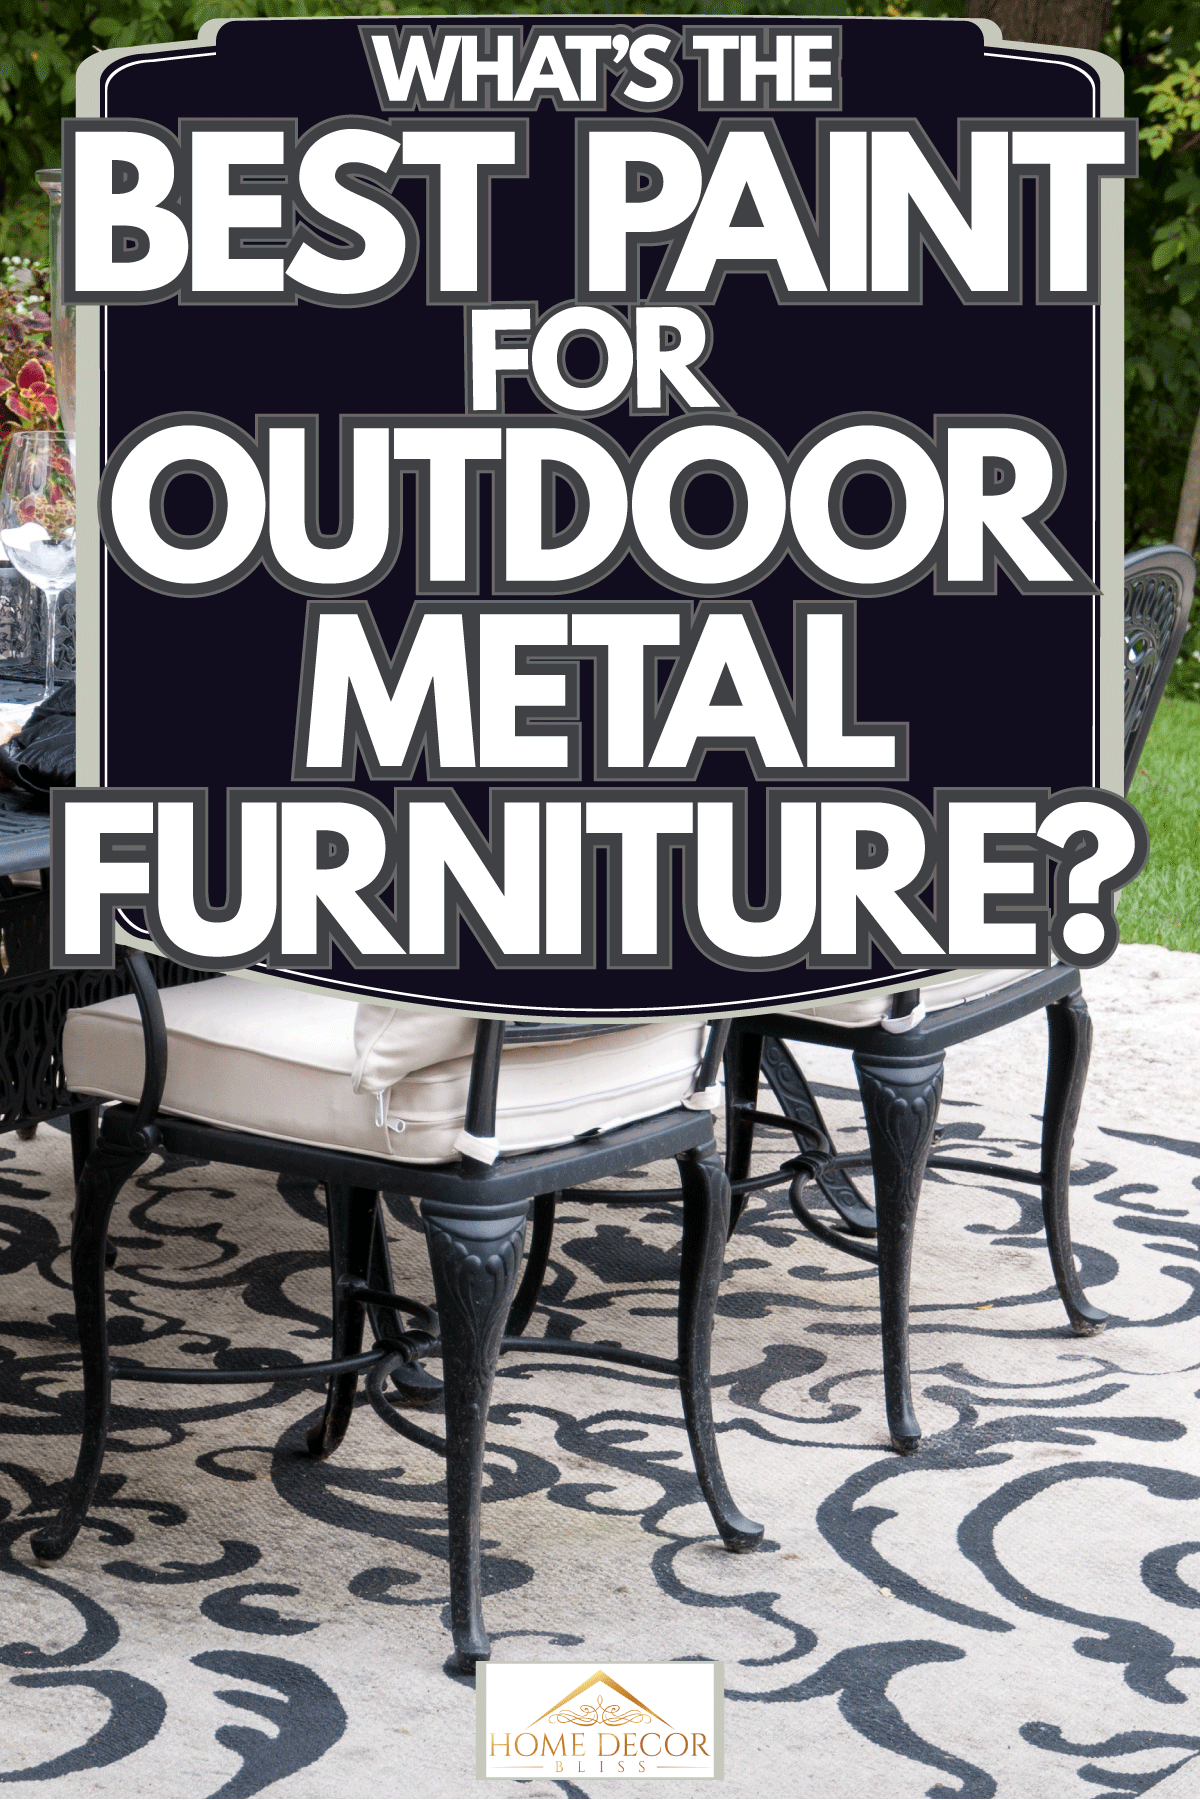 Black painted outdoor metal furniture's with dining essentials, What's The Best Paint For Outdoor Metal Furniture?